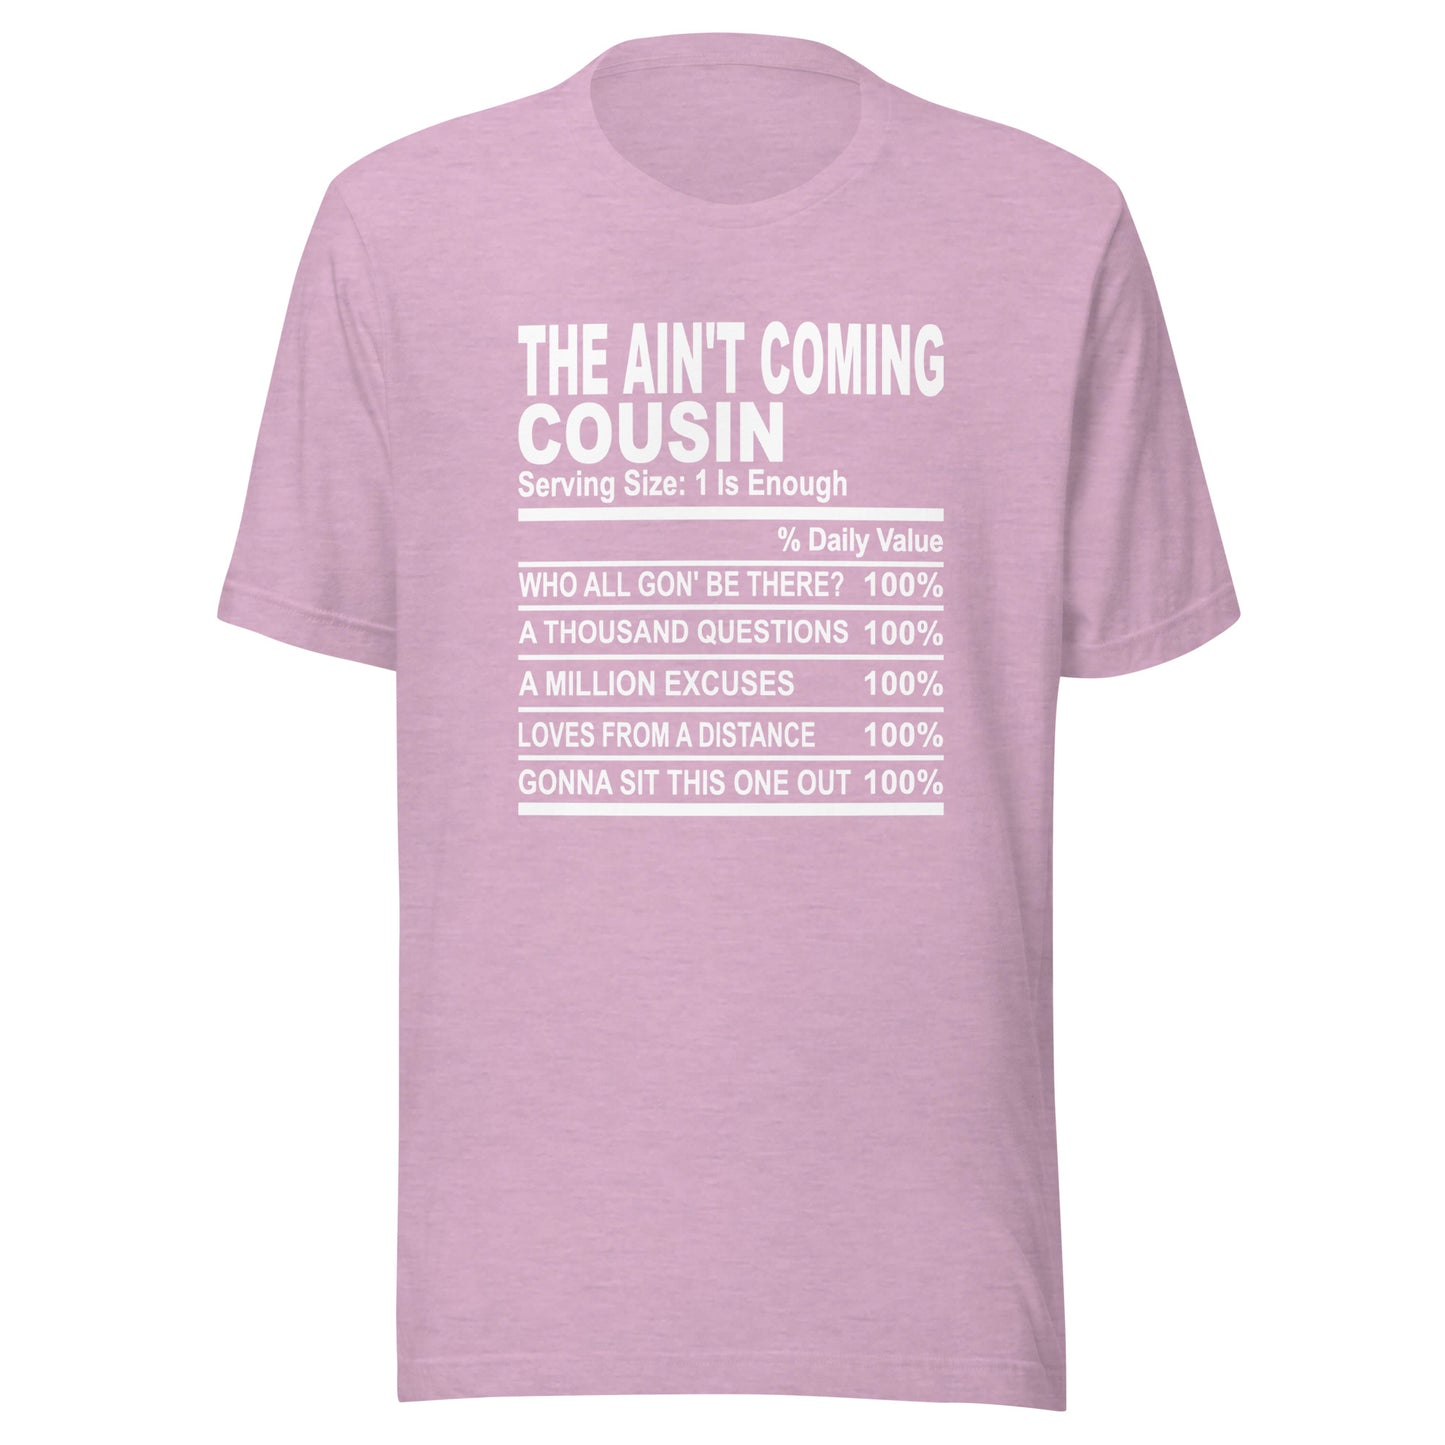 THE AIN'T COMING COUSIN - S-M - Unisex T-Shirt (white print)